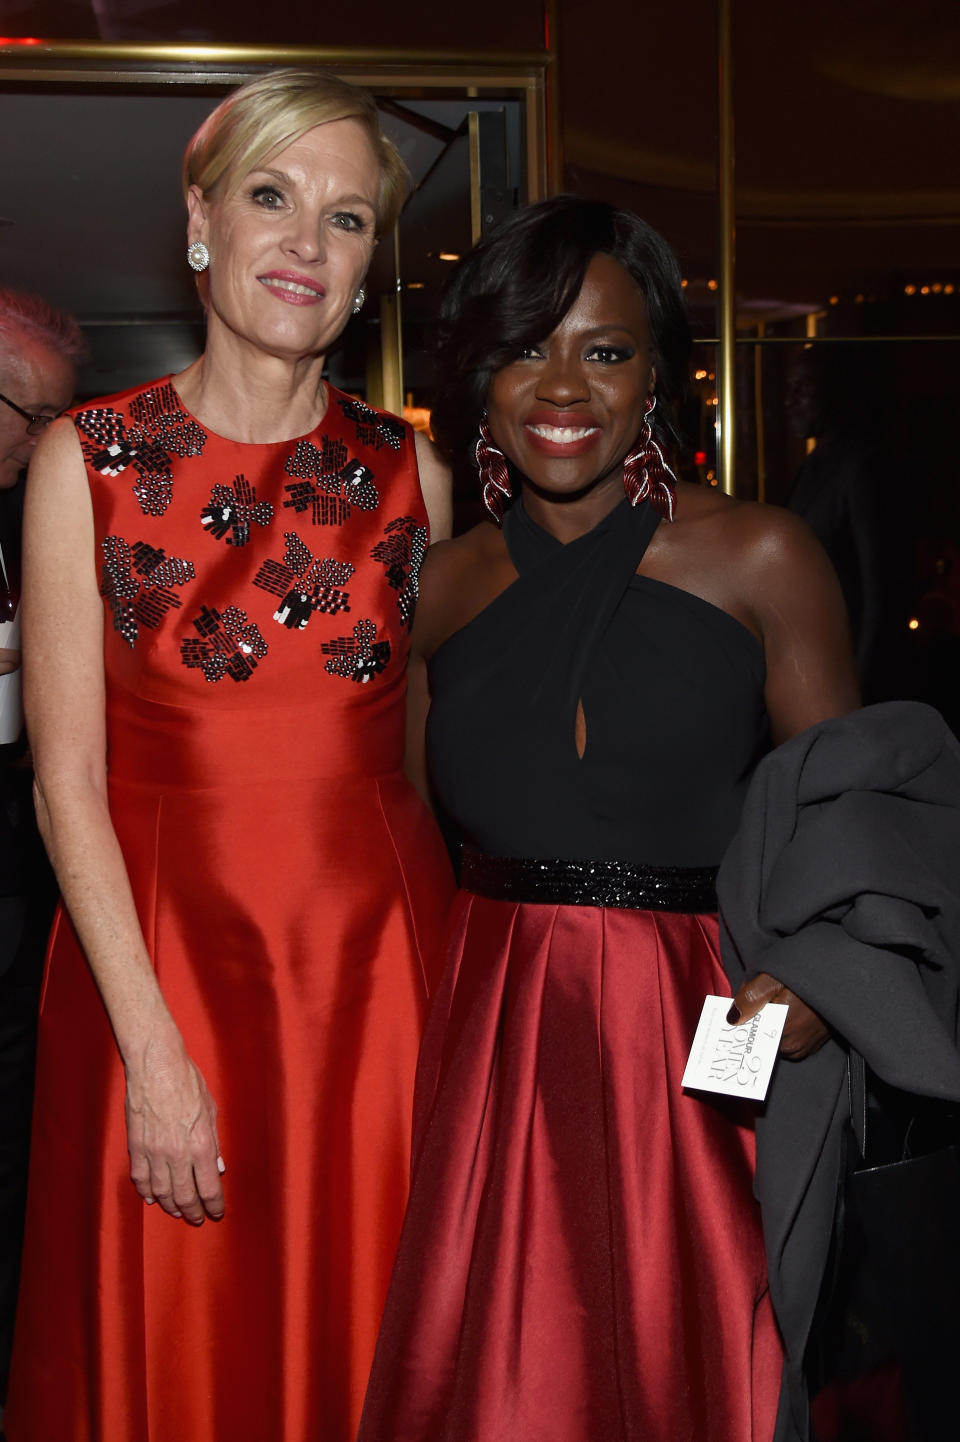 NEW YORK, NY - NOVEMBER 09:  Honoree, activist Cecile Richards (L) and Viola Davis attend the 2015 Glamour Women of The Year Awards dinner hosted by Cindi Leive at The Rainbow Room on November 9, 2015 in New York City.  (Photo by Jamie McCarthy/Getty Images for Glamour)